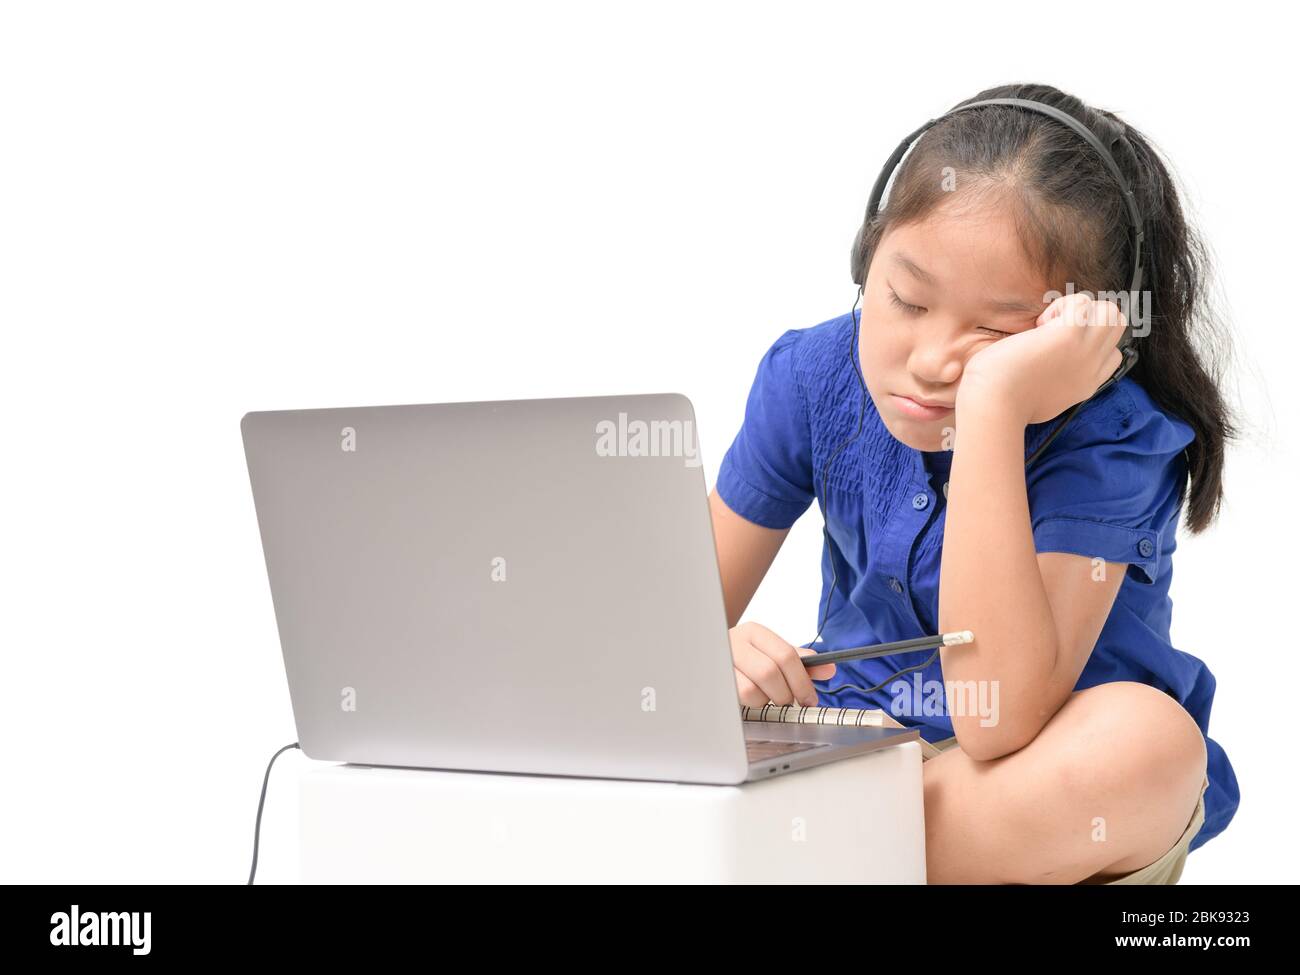 Coronavirus Outbreak. Lockdown and school closures. School girl watching online education classes feeling bored and depressed at home. COVID-19 pandem Stock Photo